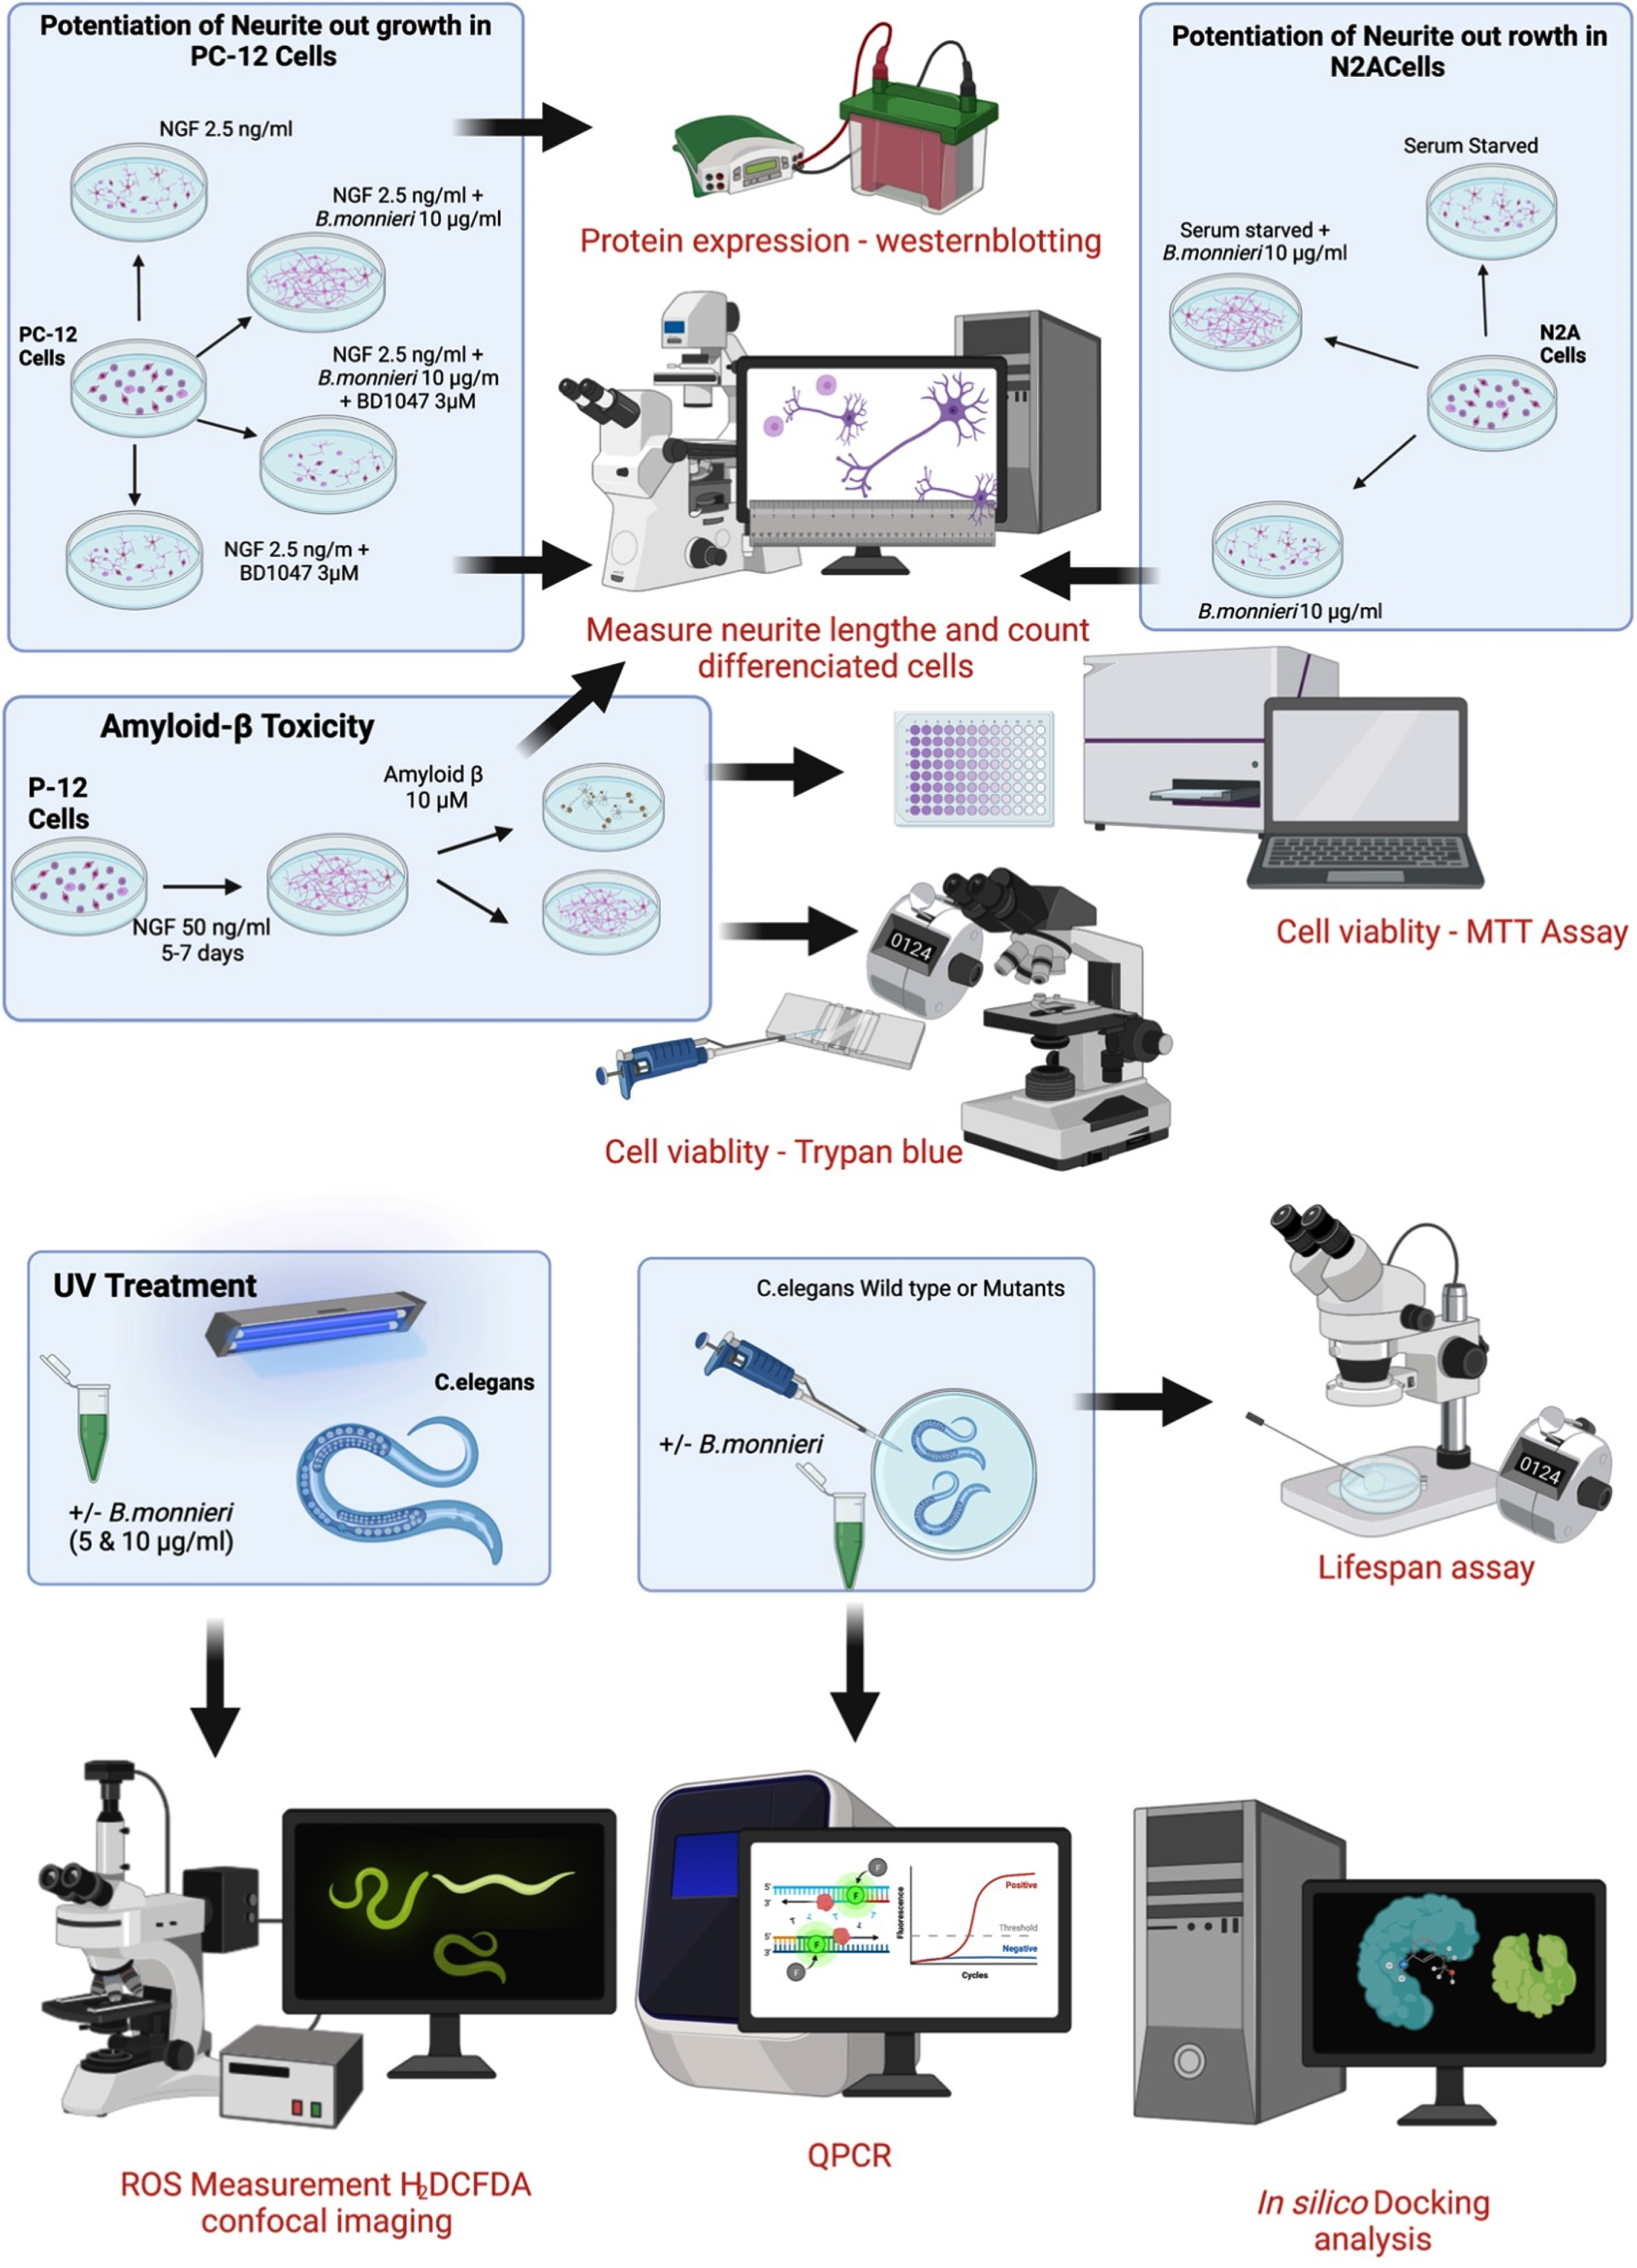 Summary of experimental cell culture and C. elegans procedures used in this study.